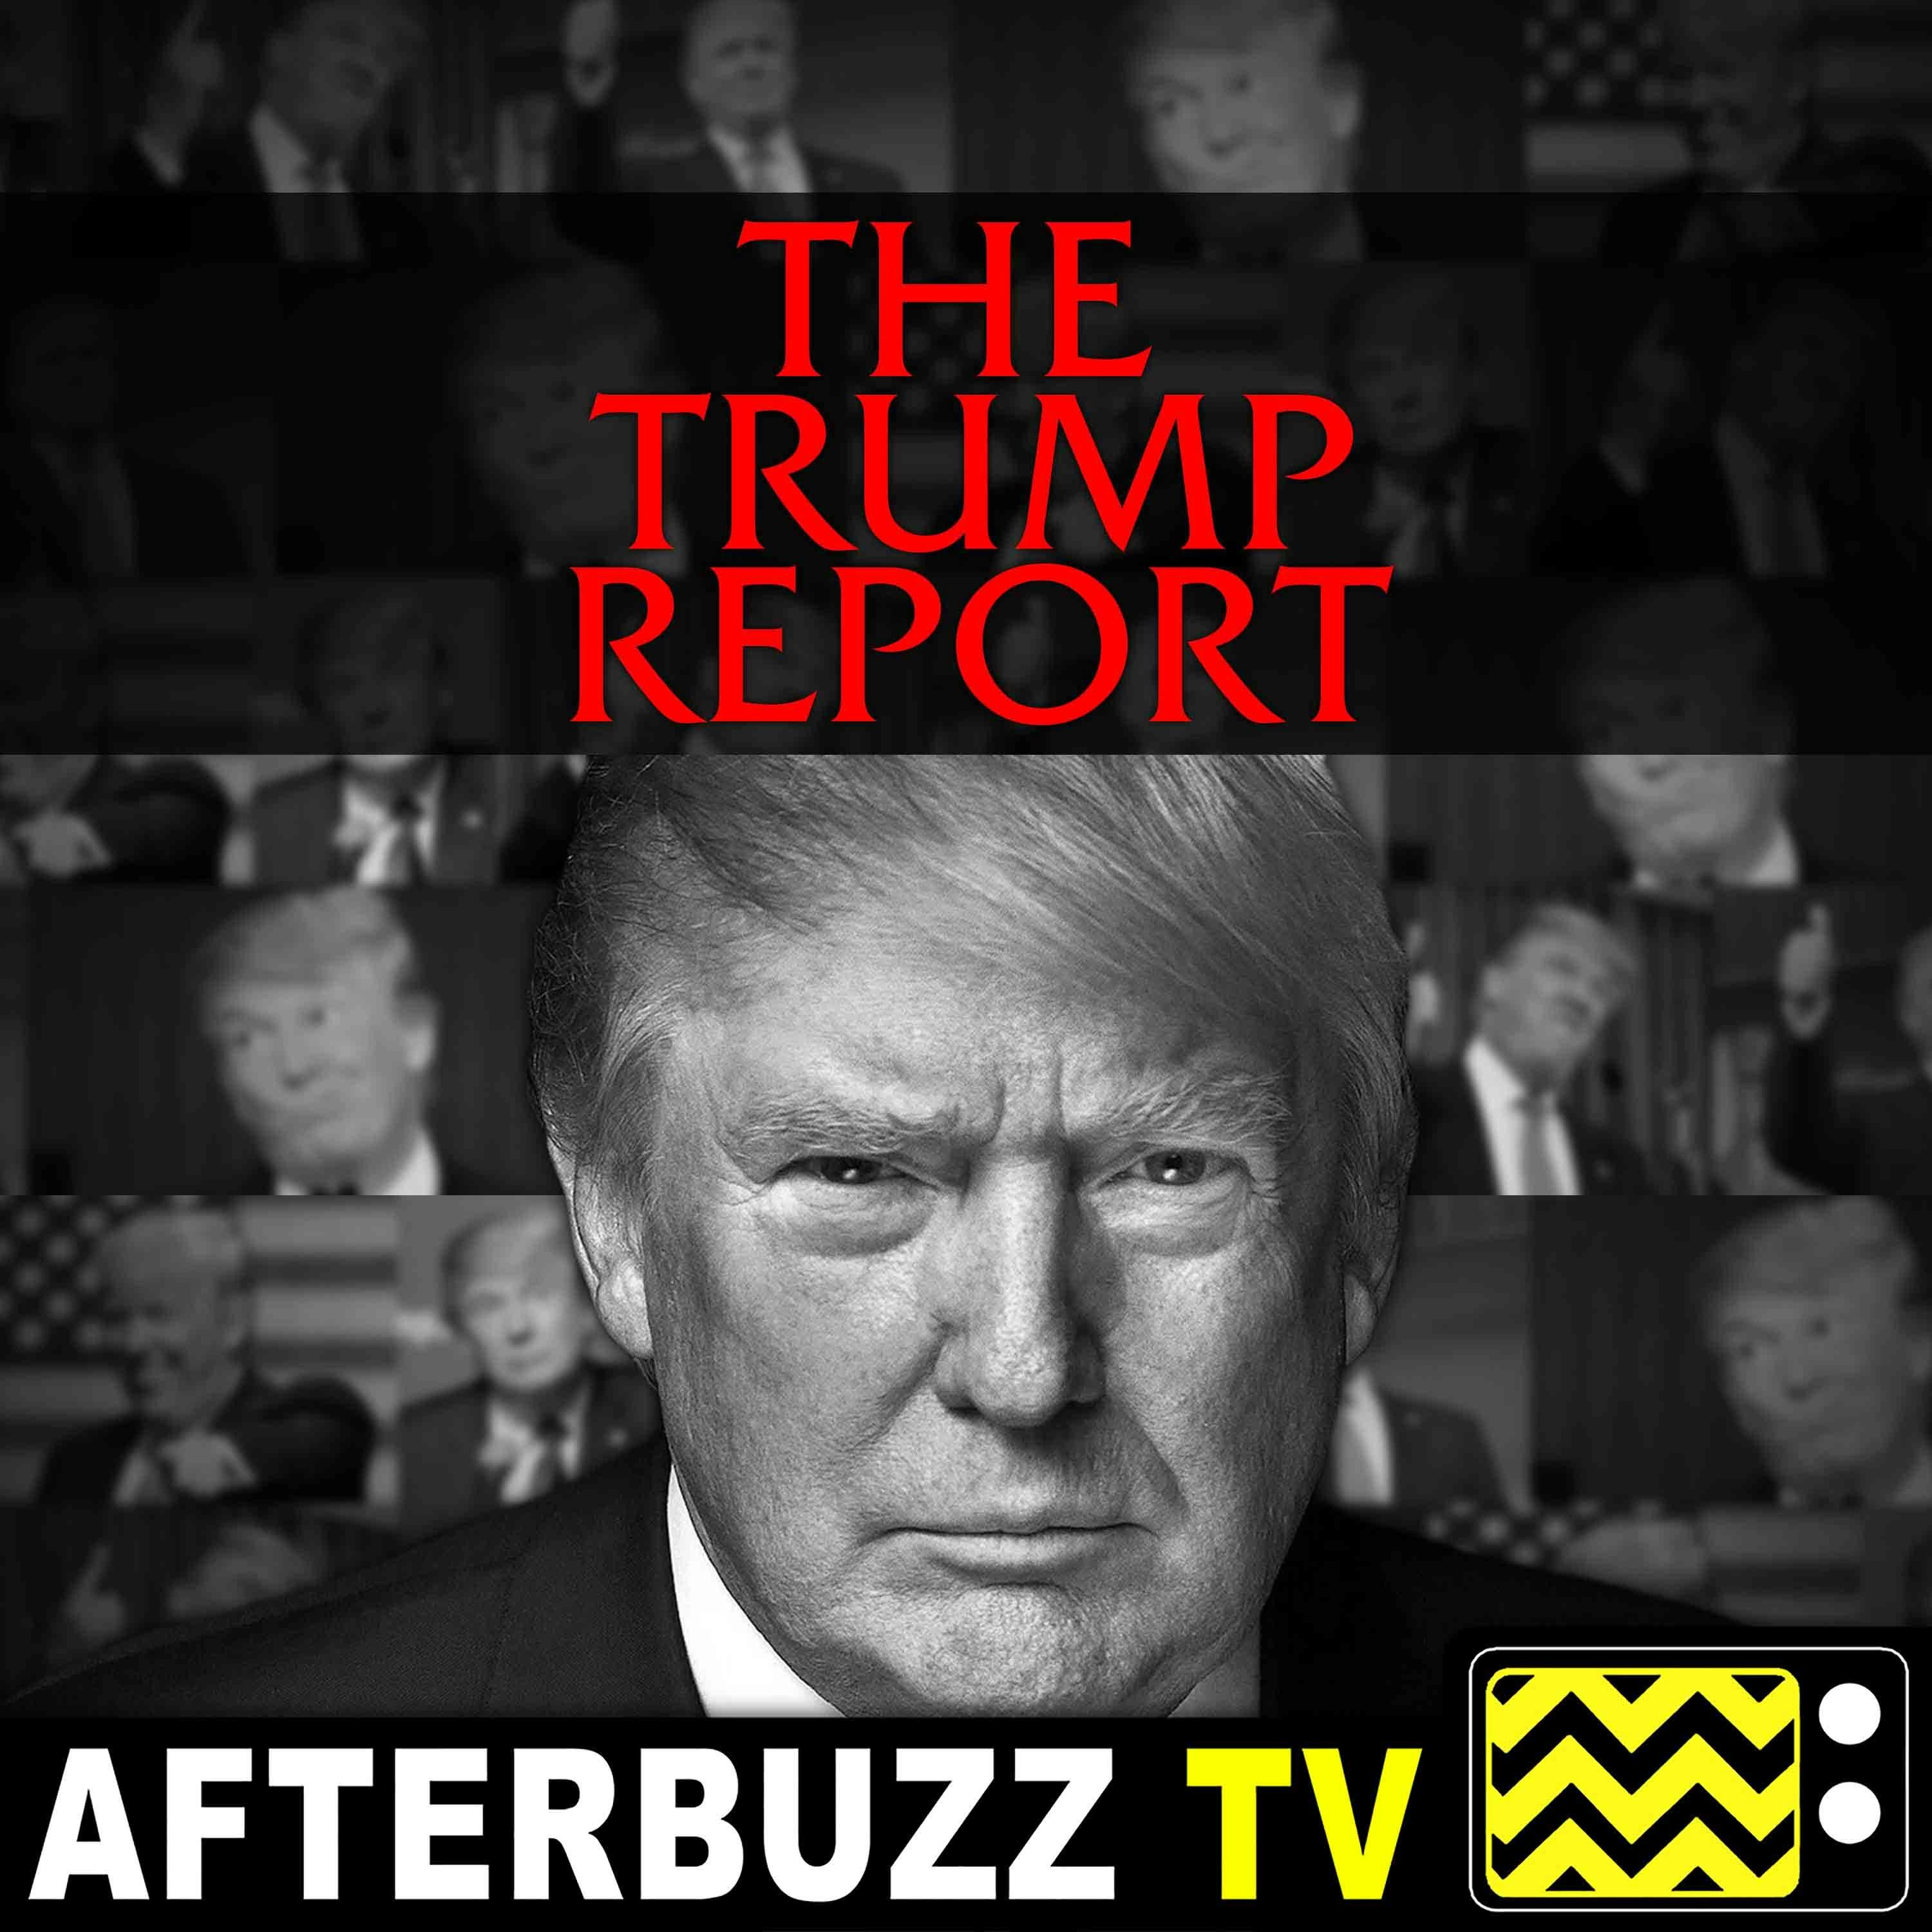 The Trump Report | Anonymous and Obama’s speak! | AfterBuzz TV